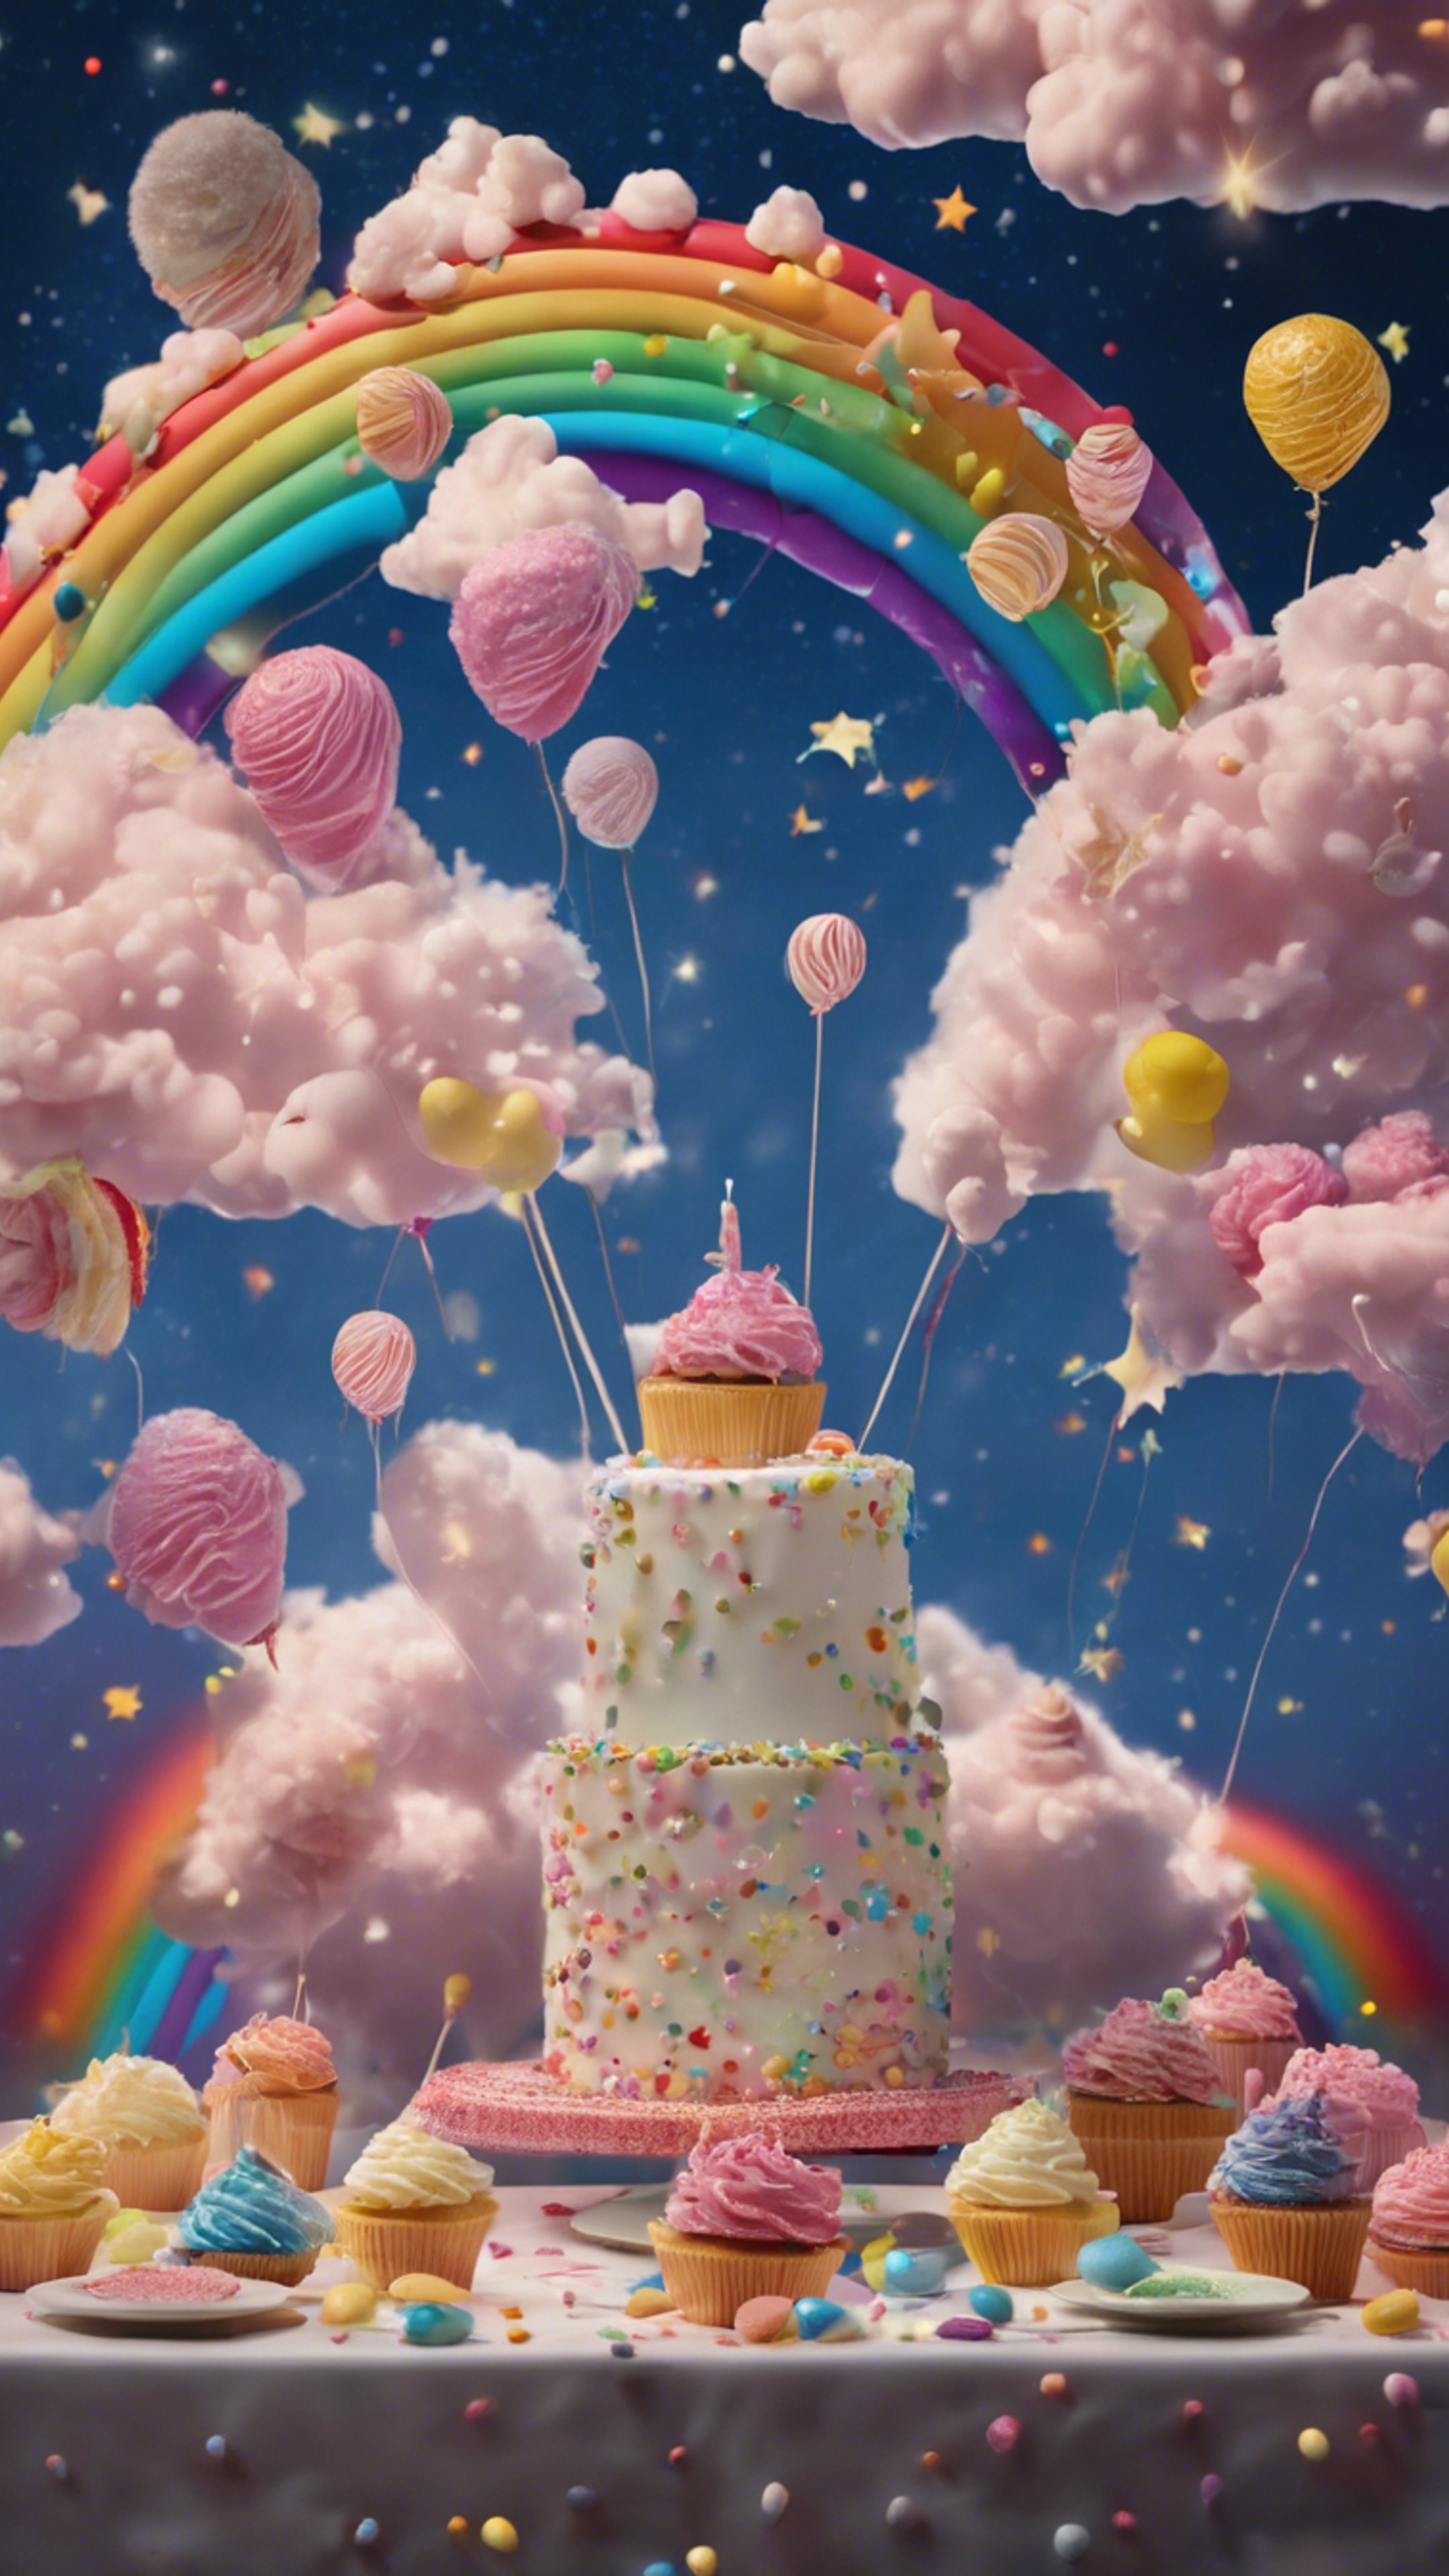 Surreal representation of a birthday party with floating cakes, candies amid fluffy clouds and rainbows discordantly juxtaposed against a starry night sky. Behang[7f18c2fd7760424e83fc]